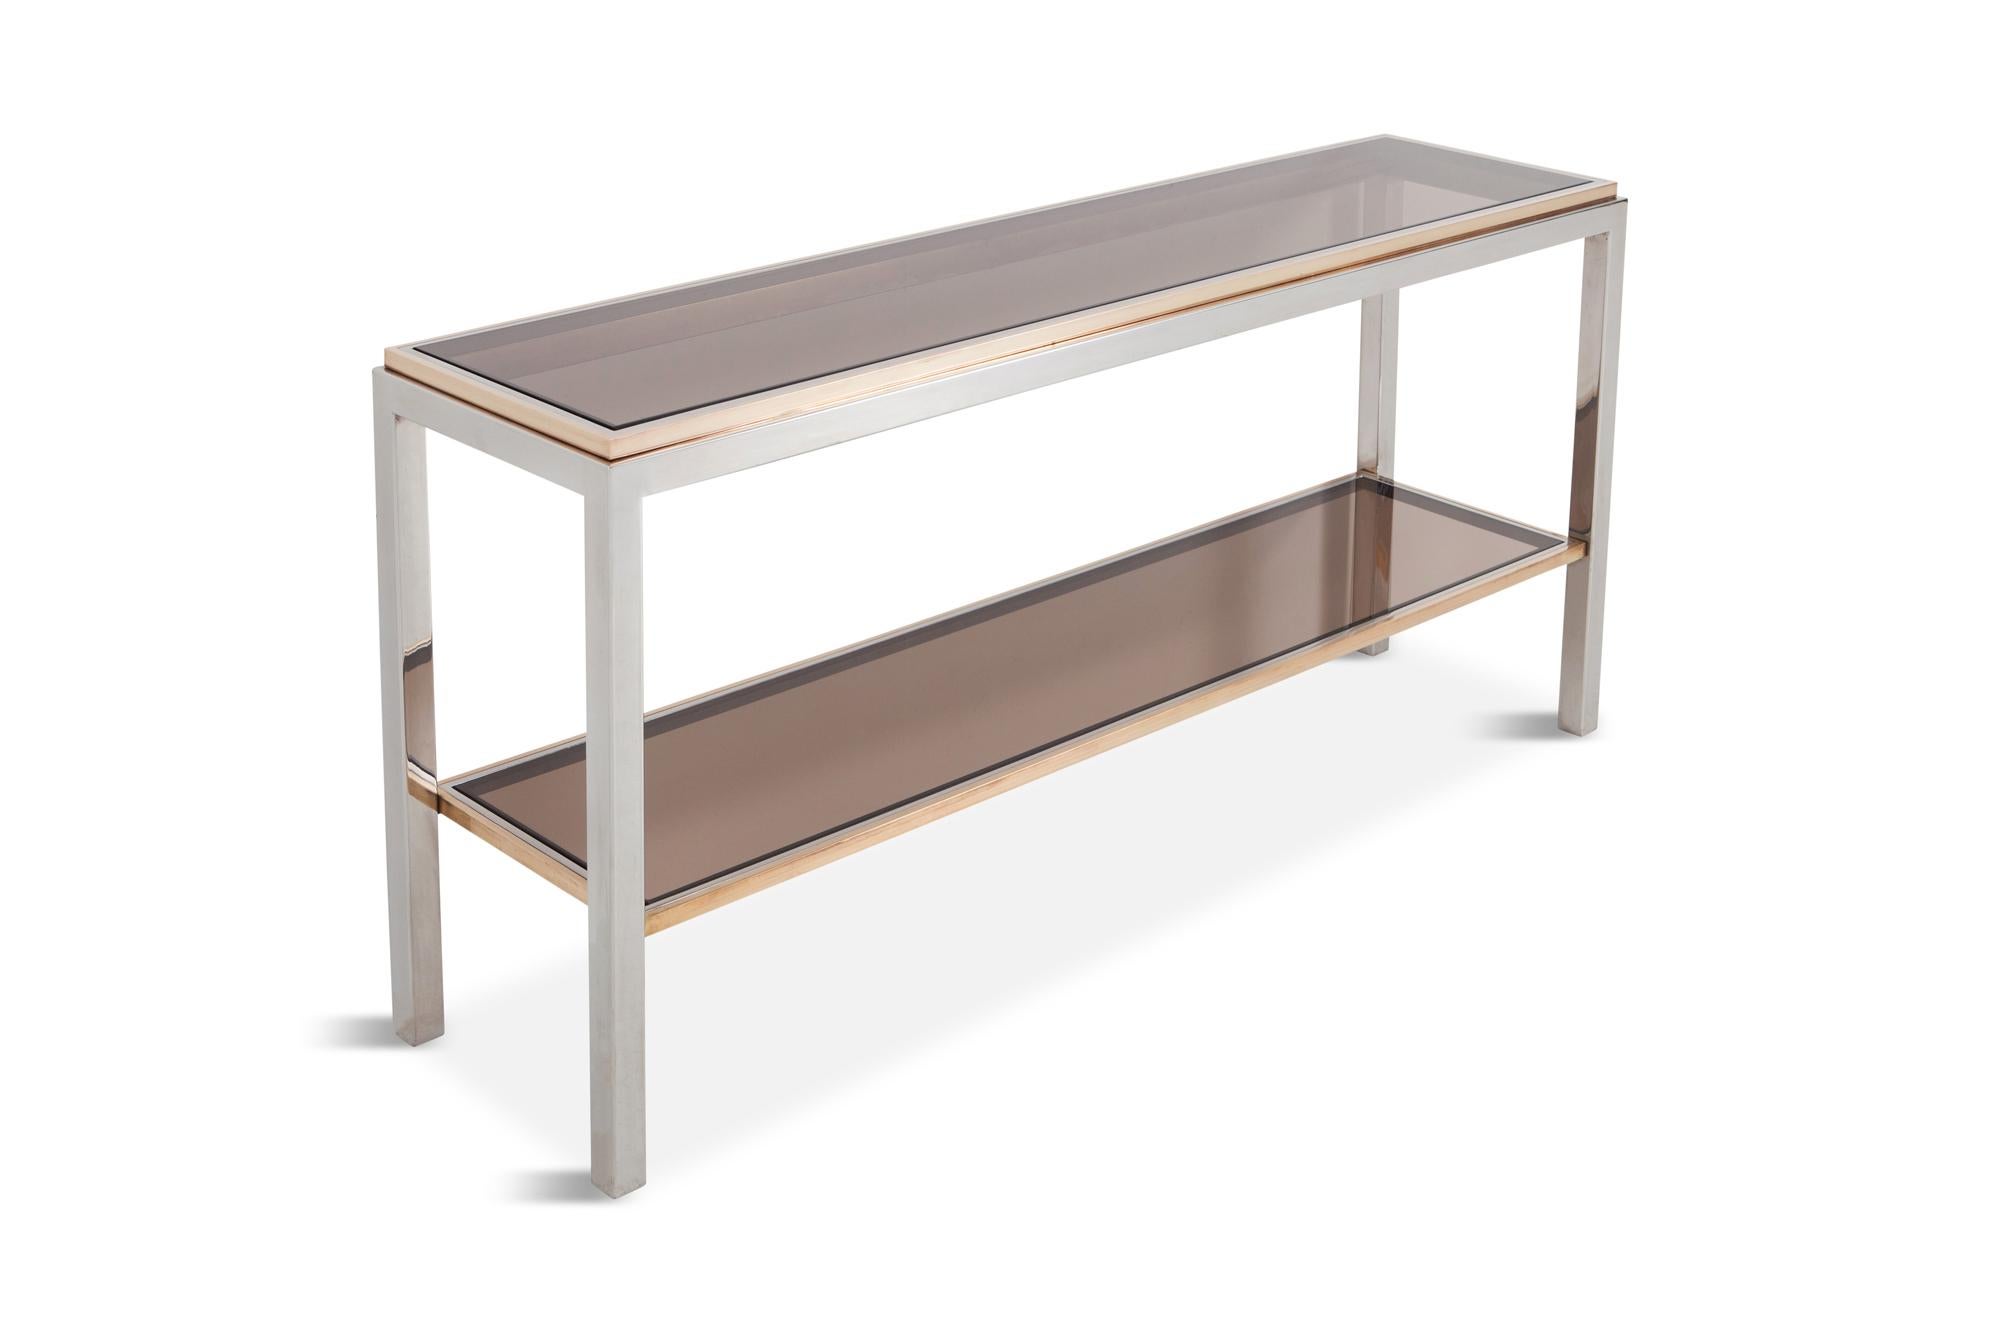 Exceptionally large console table by Willy Rizzo from his Linea Flaminia collection
a two-tier console table in chromed metal with solid brass details and smoked glass shelves.
Would fit well in a Hollywood Regency inspired glam interior, although